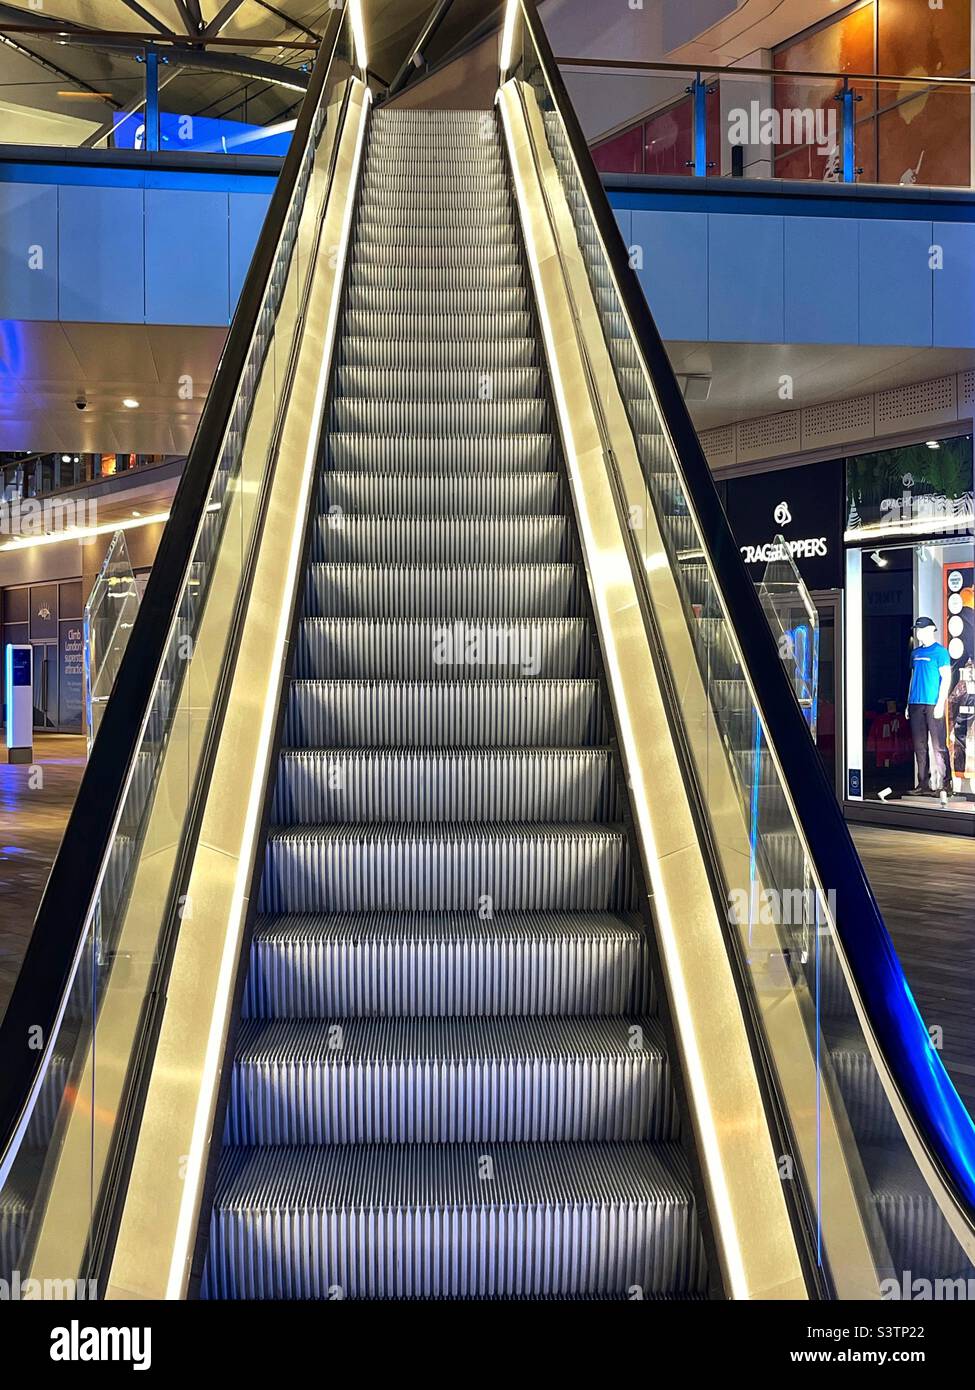 Escalator in a shopping centre illuminated by footlights. No people. Stock Photo